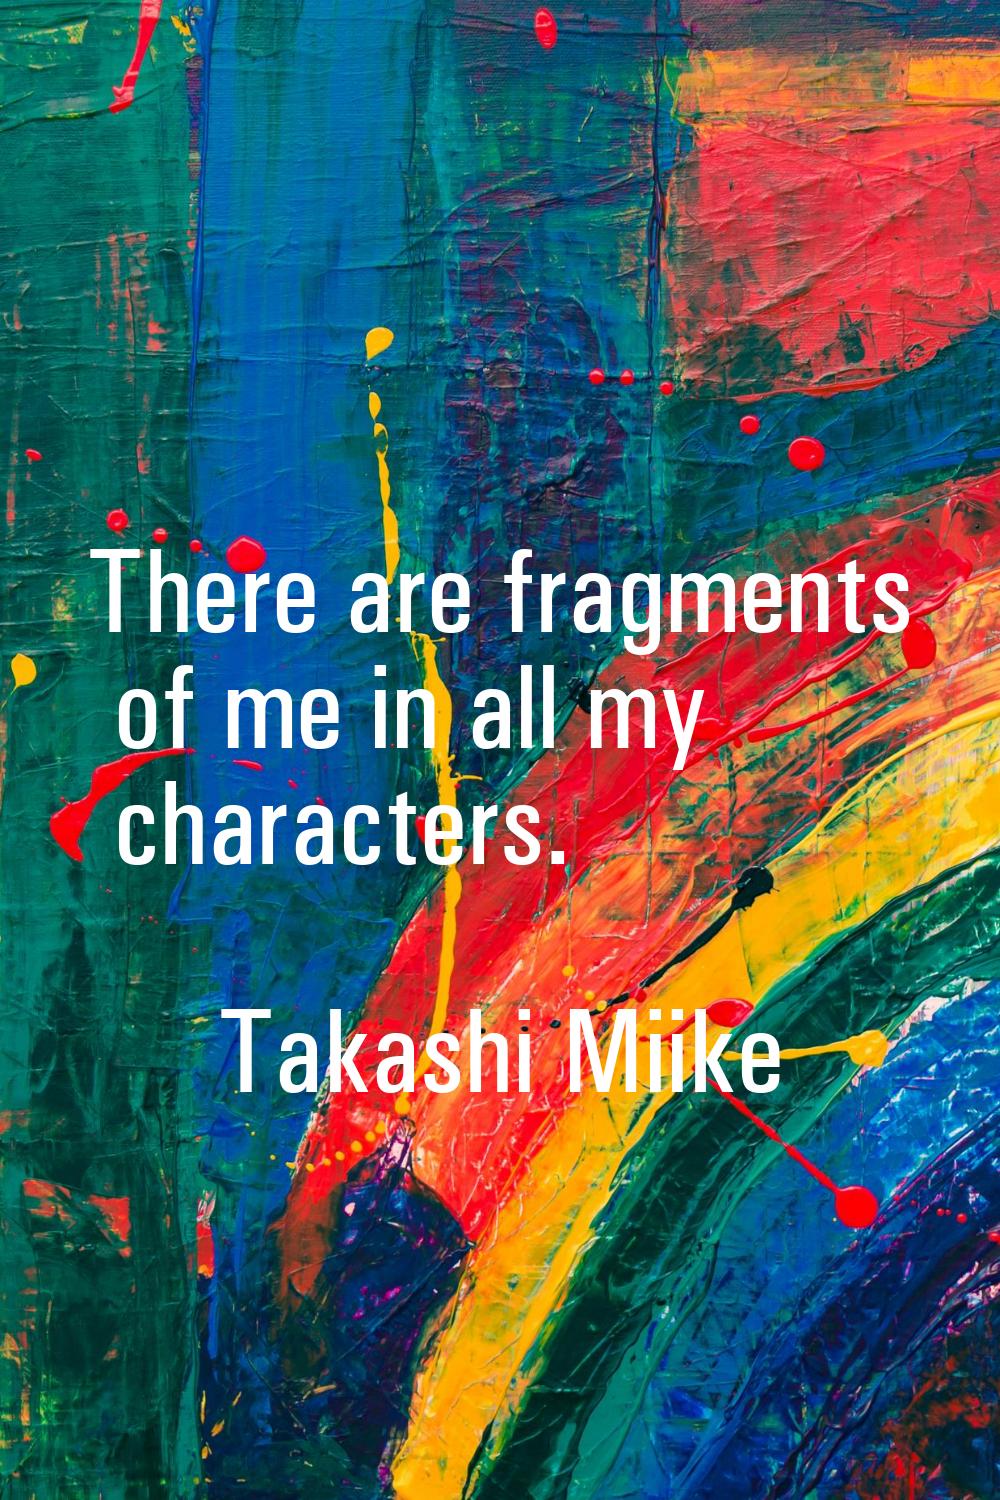 There are fragments of me in all my characters.